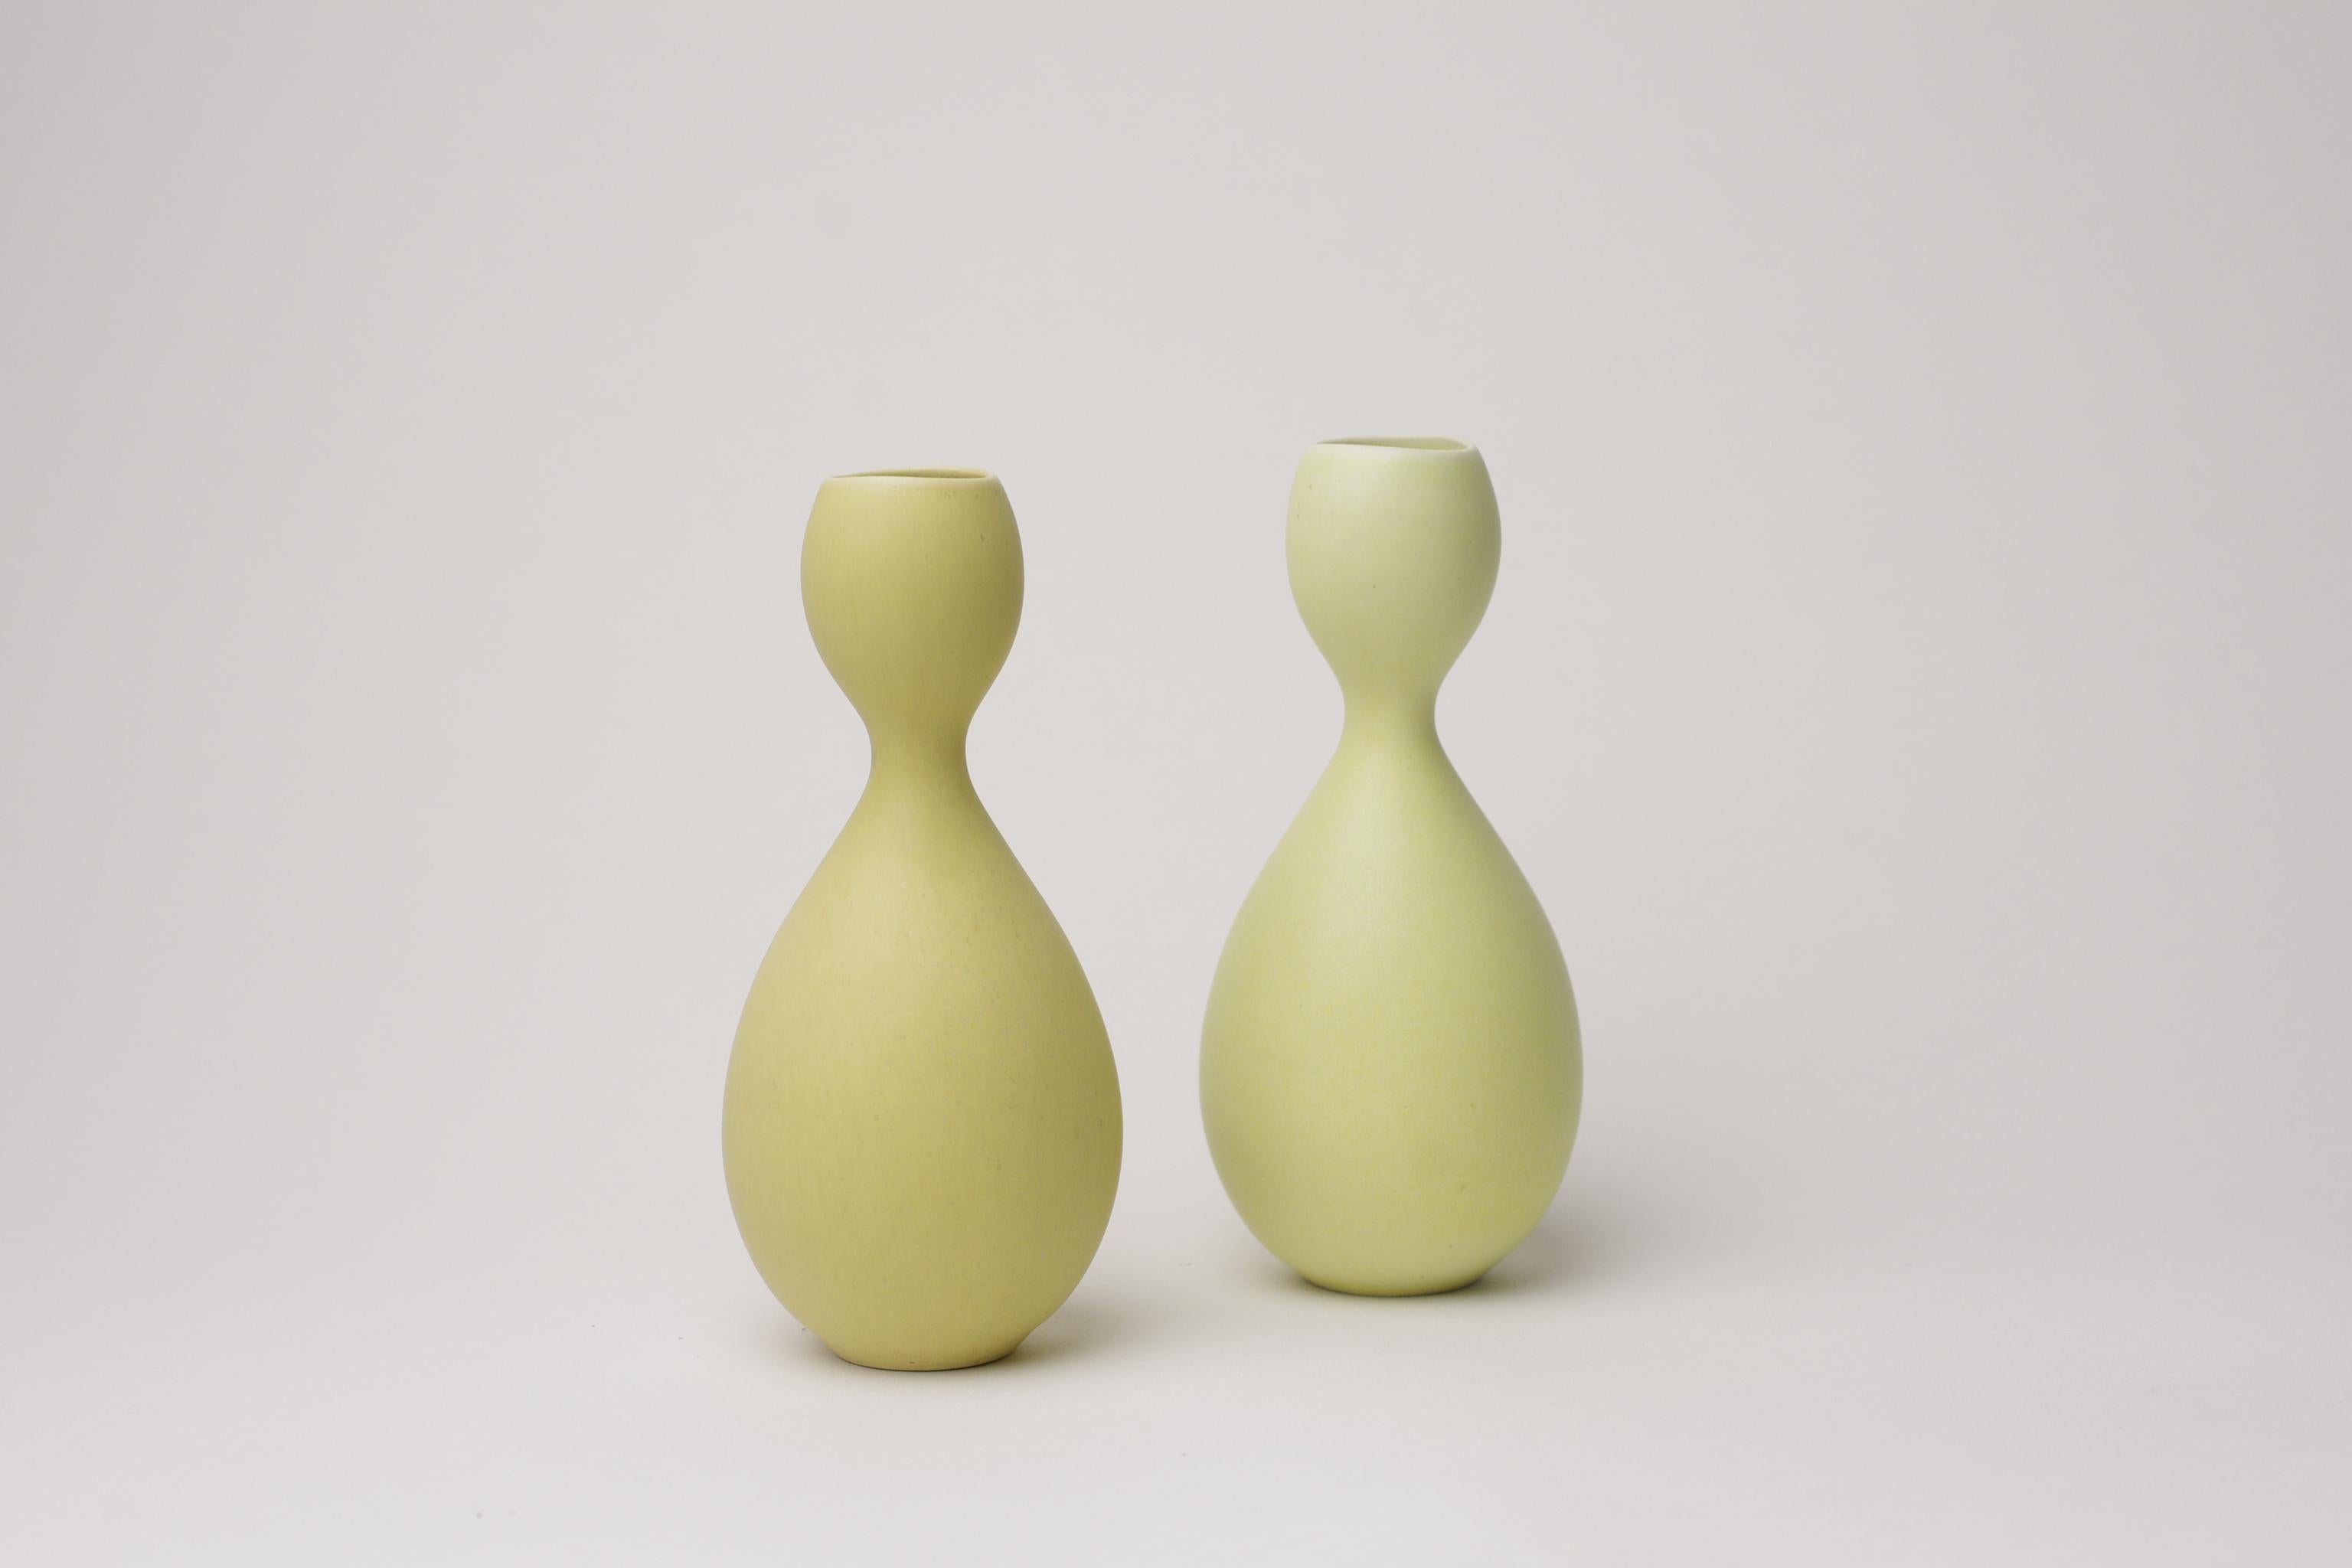 Product Description:
These two smaller vases are part of Stig Lindberg's series called Vitrin. The Virtin series consists of 14 different items, 3 bowls and 11 vases. The Vitrin series came to light as an attempt to offer artistically high quality